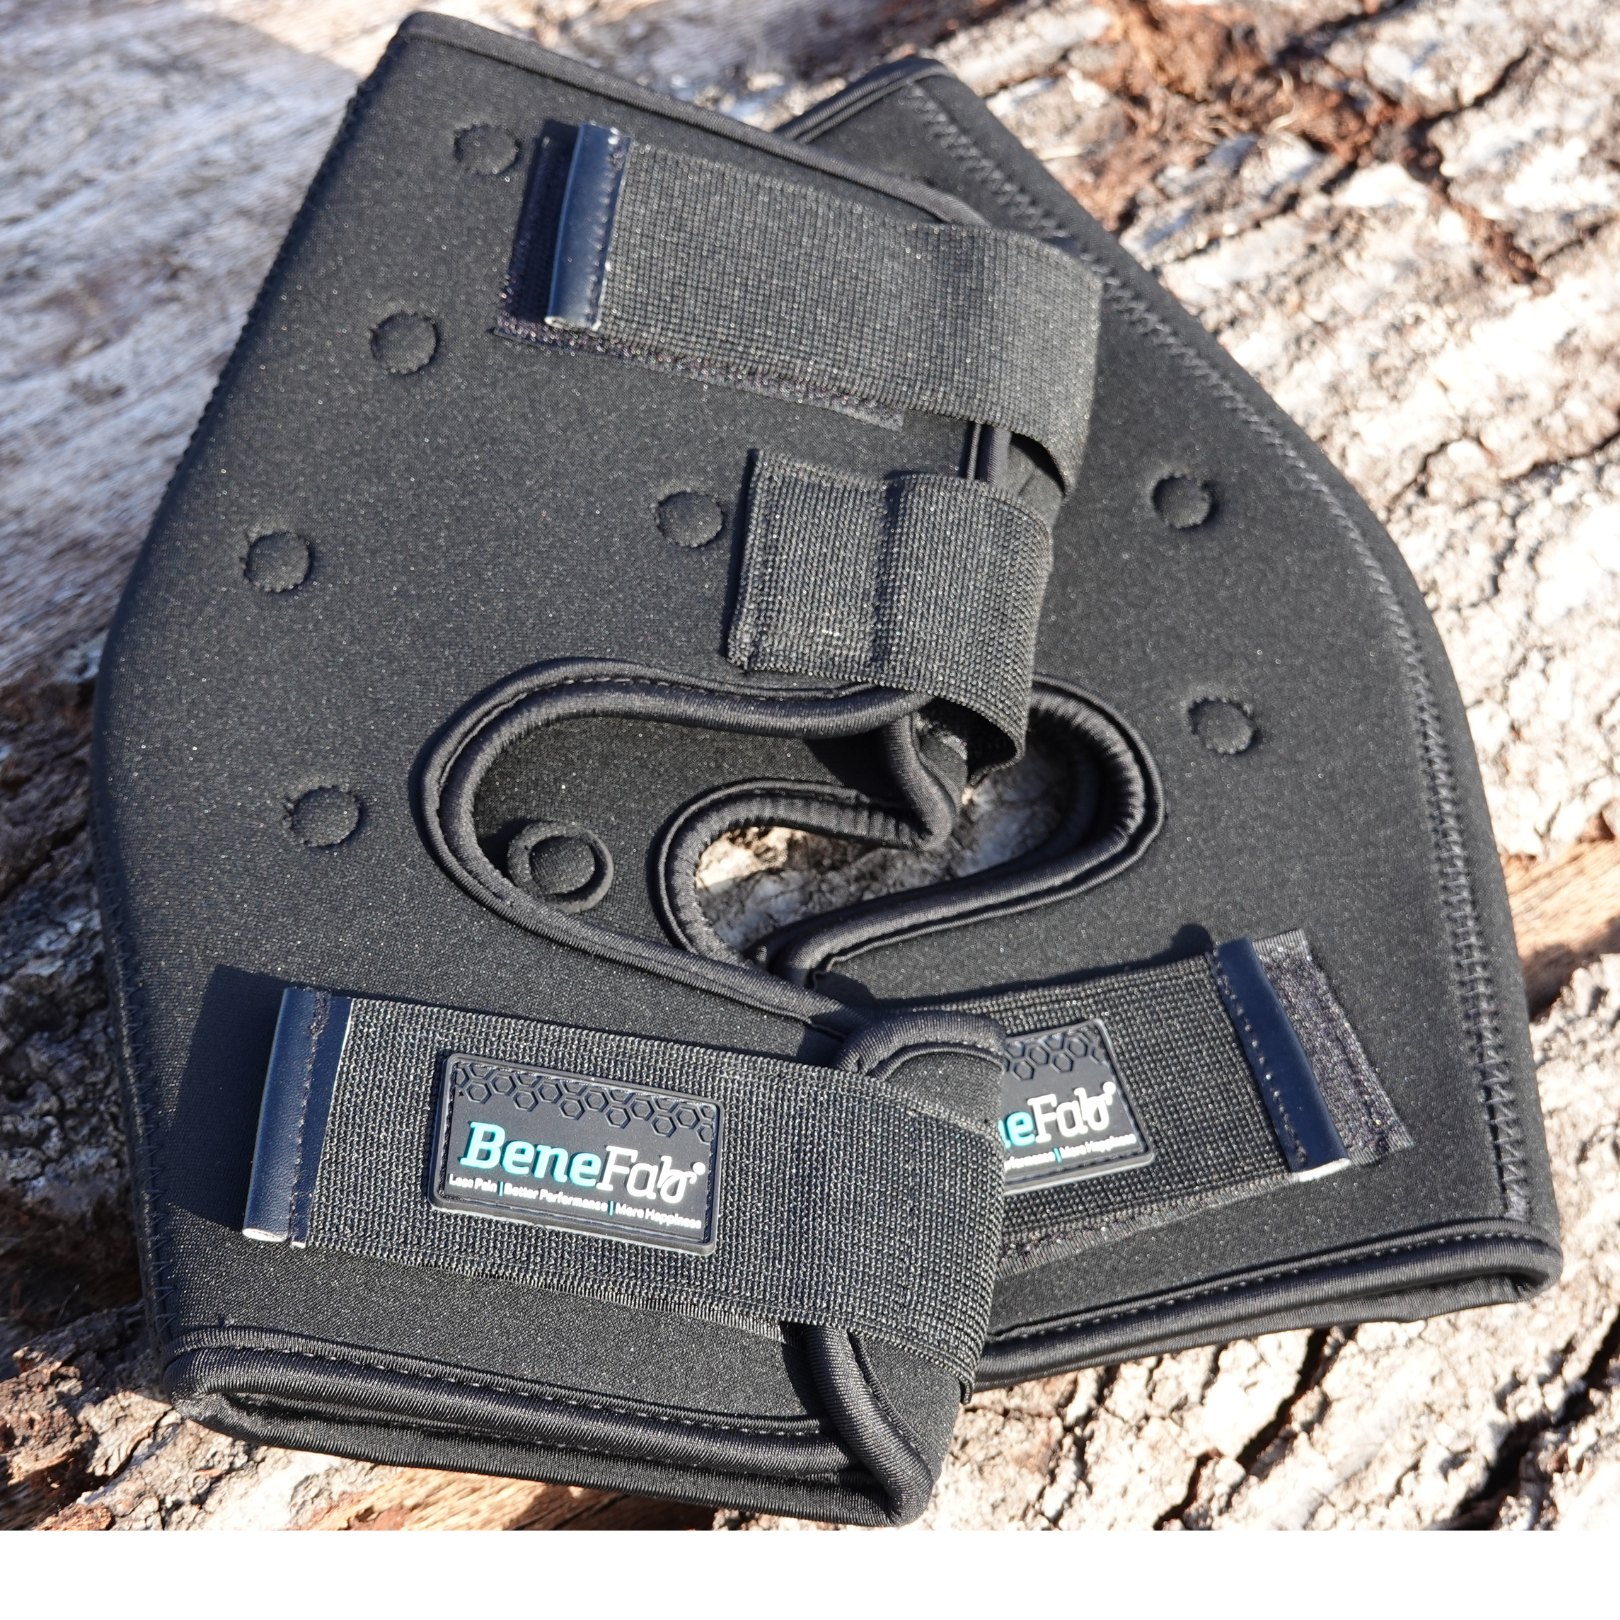 Smart Ligament Stretching Belt - Top Smart Products